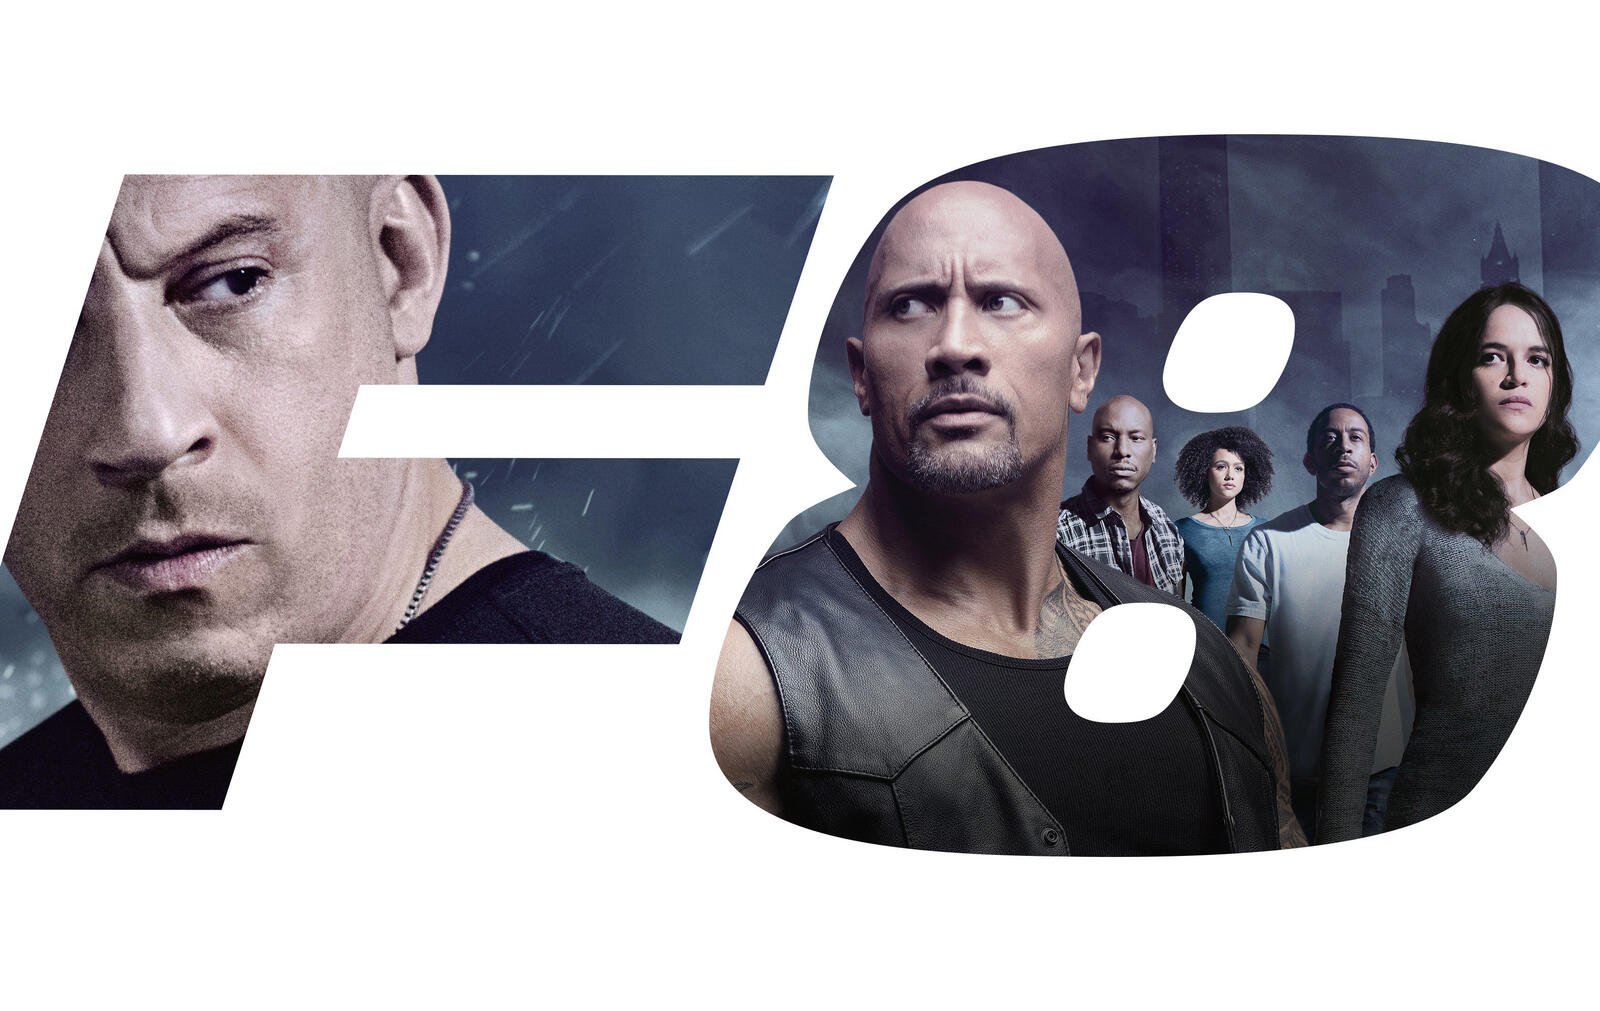 Wallpapers fast and furious movies The Fate Of The Furious on the desktop